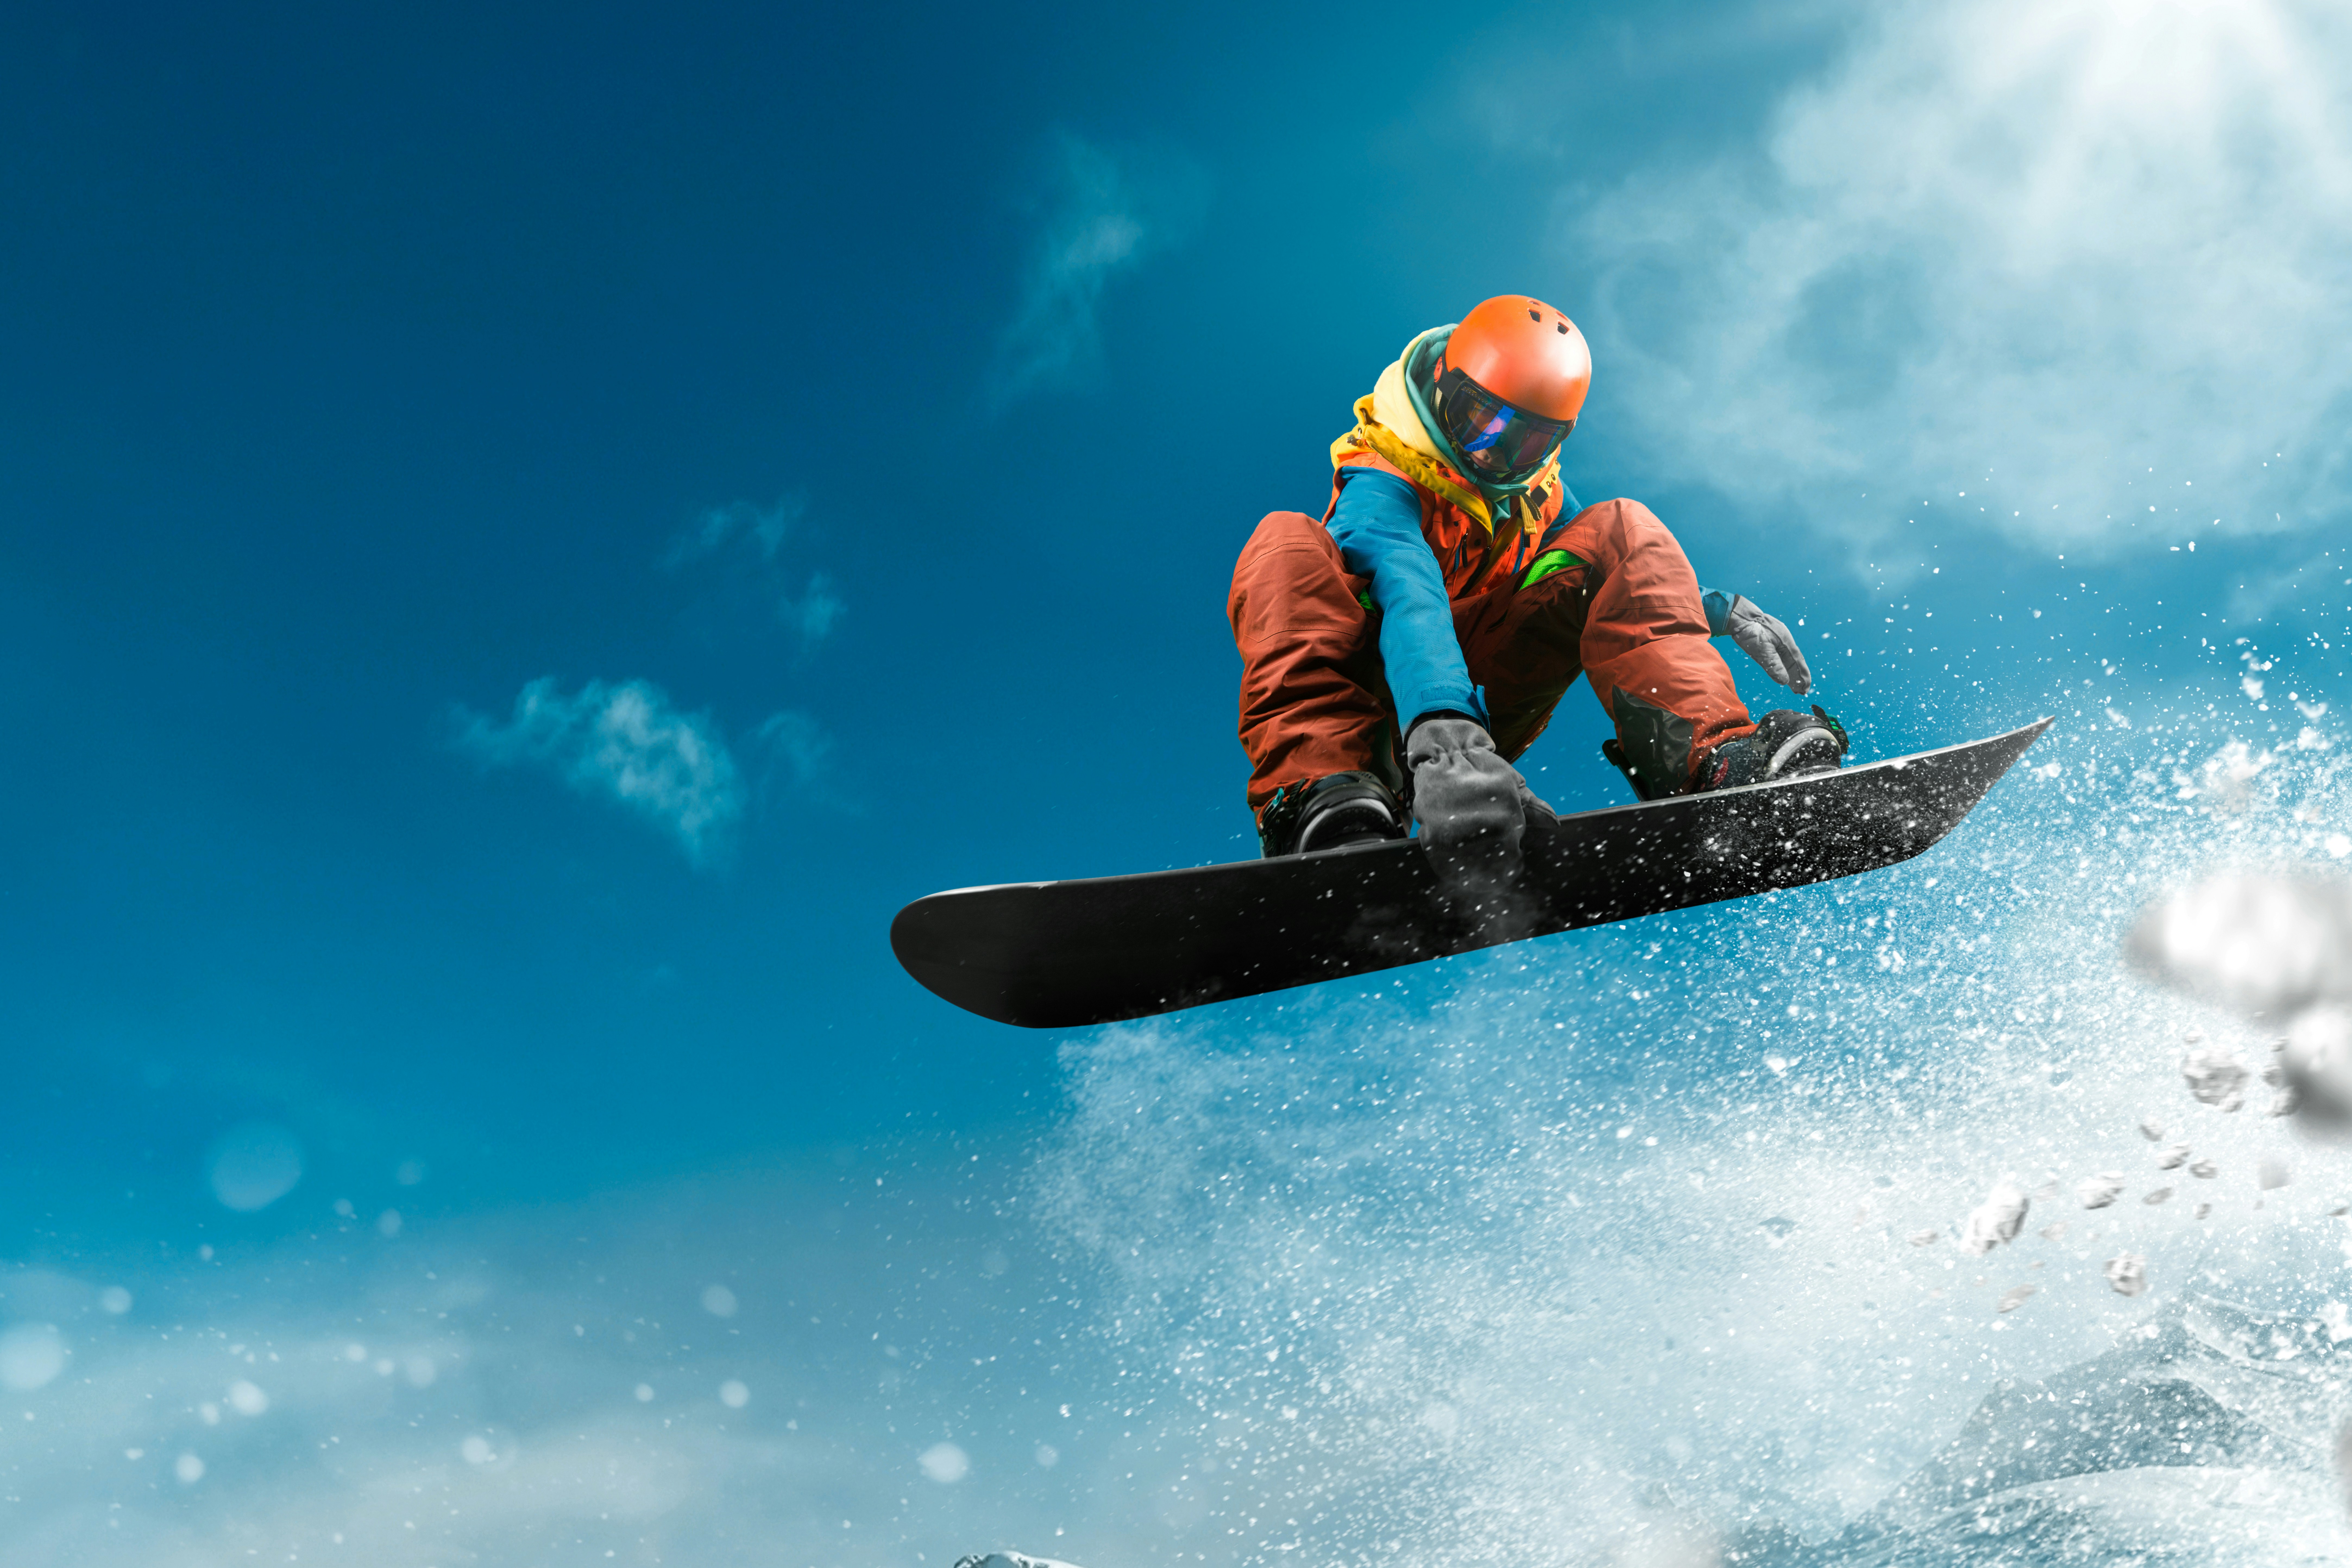 A snowboarder flying through the sky